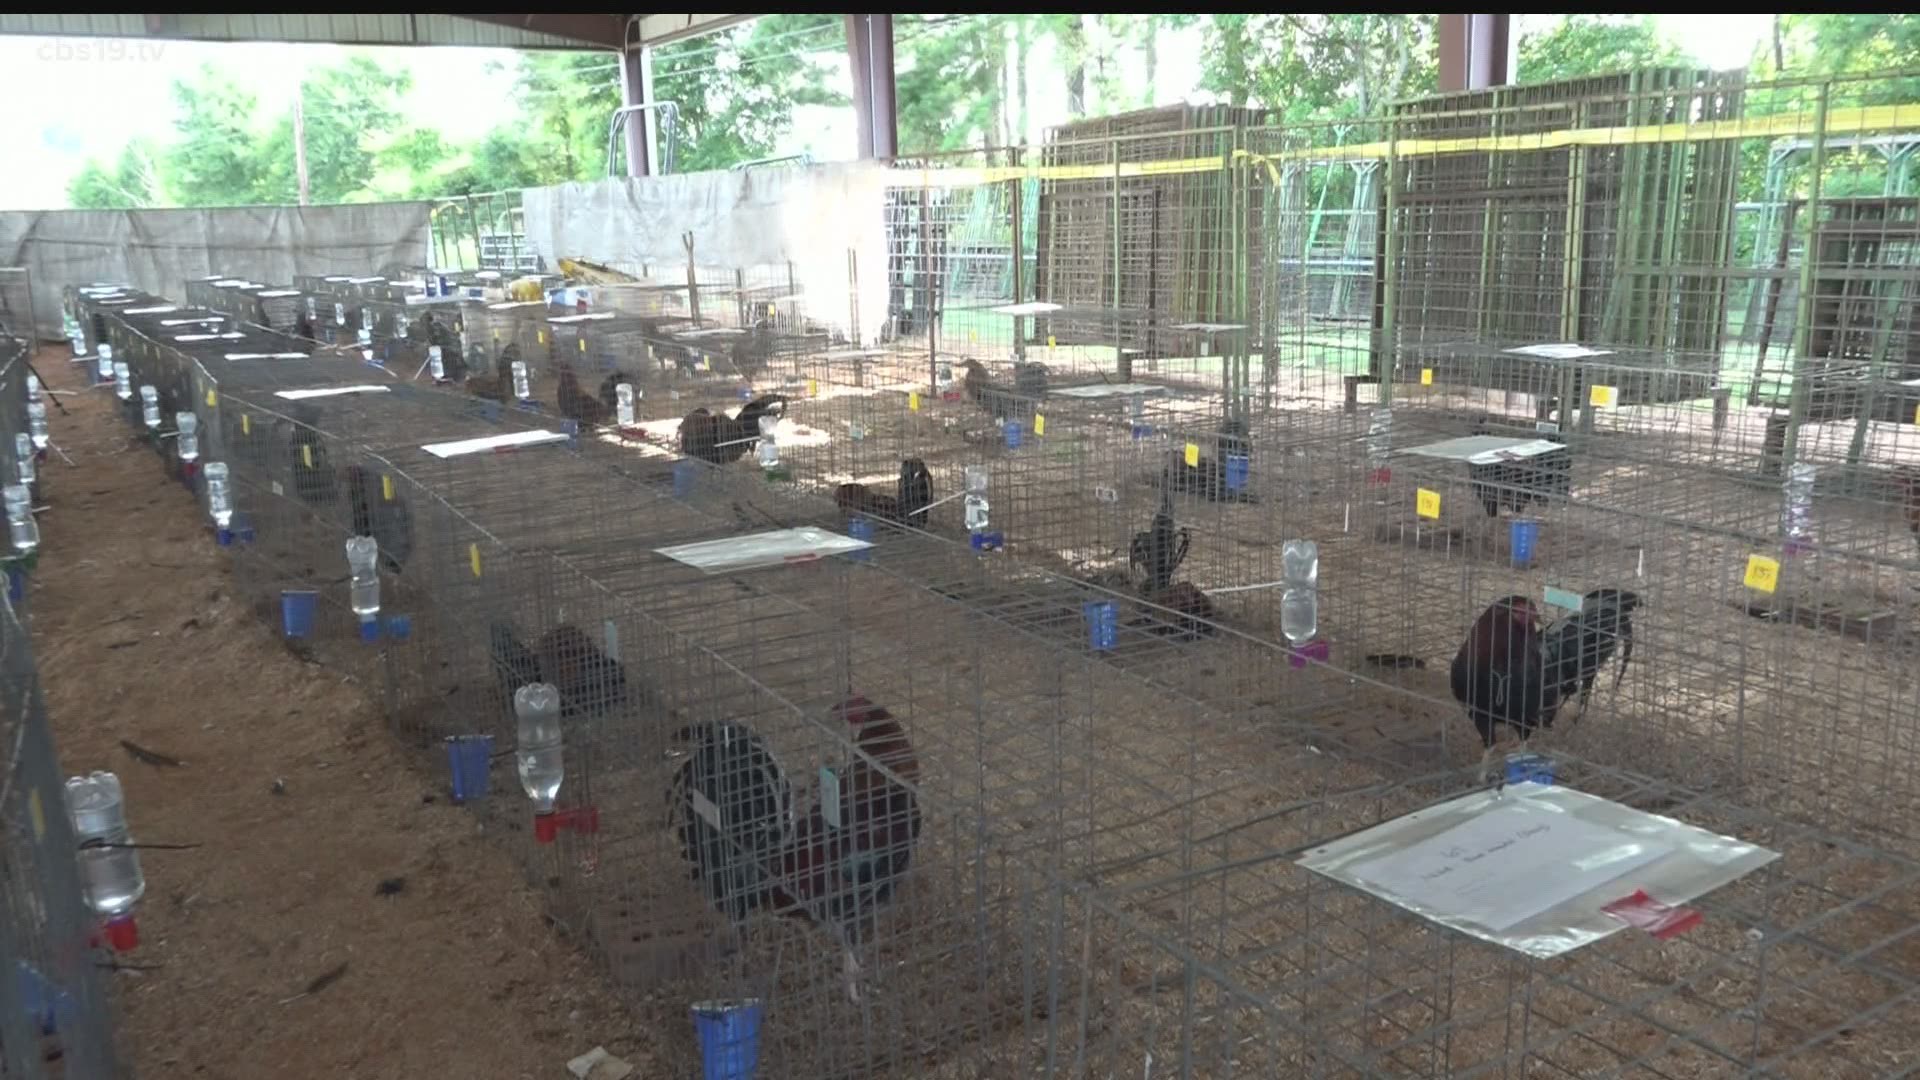 The Rusk County Sheriff's Office donated 75 roosters to Pets Alive and they'll be up for adoption as early as next week.